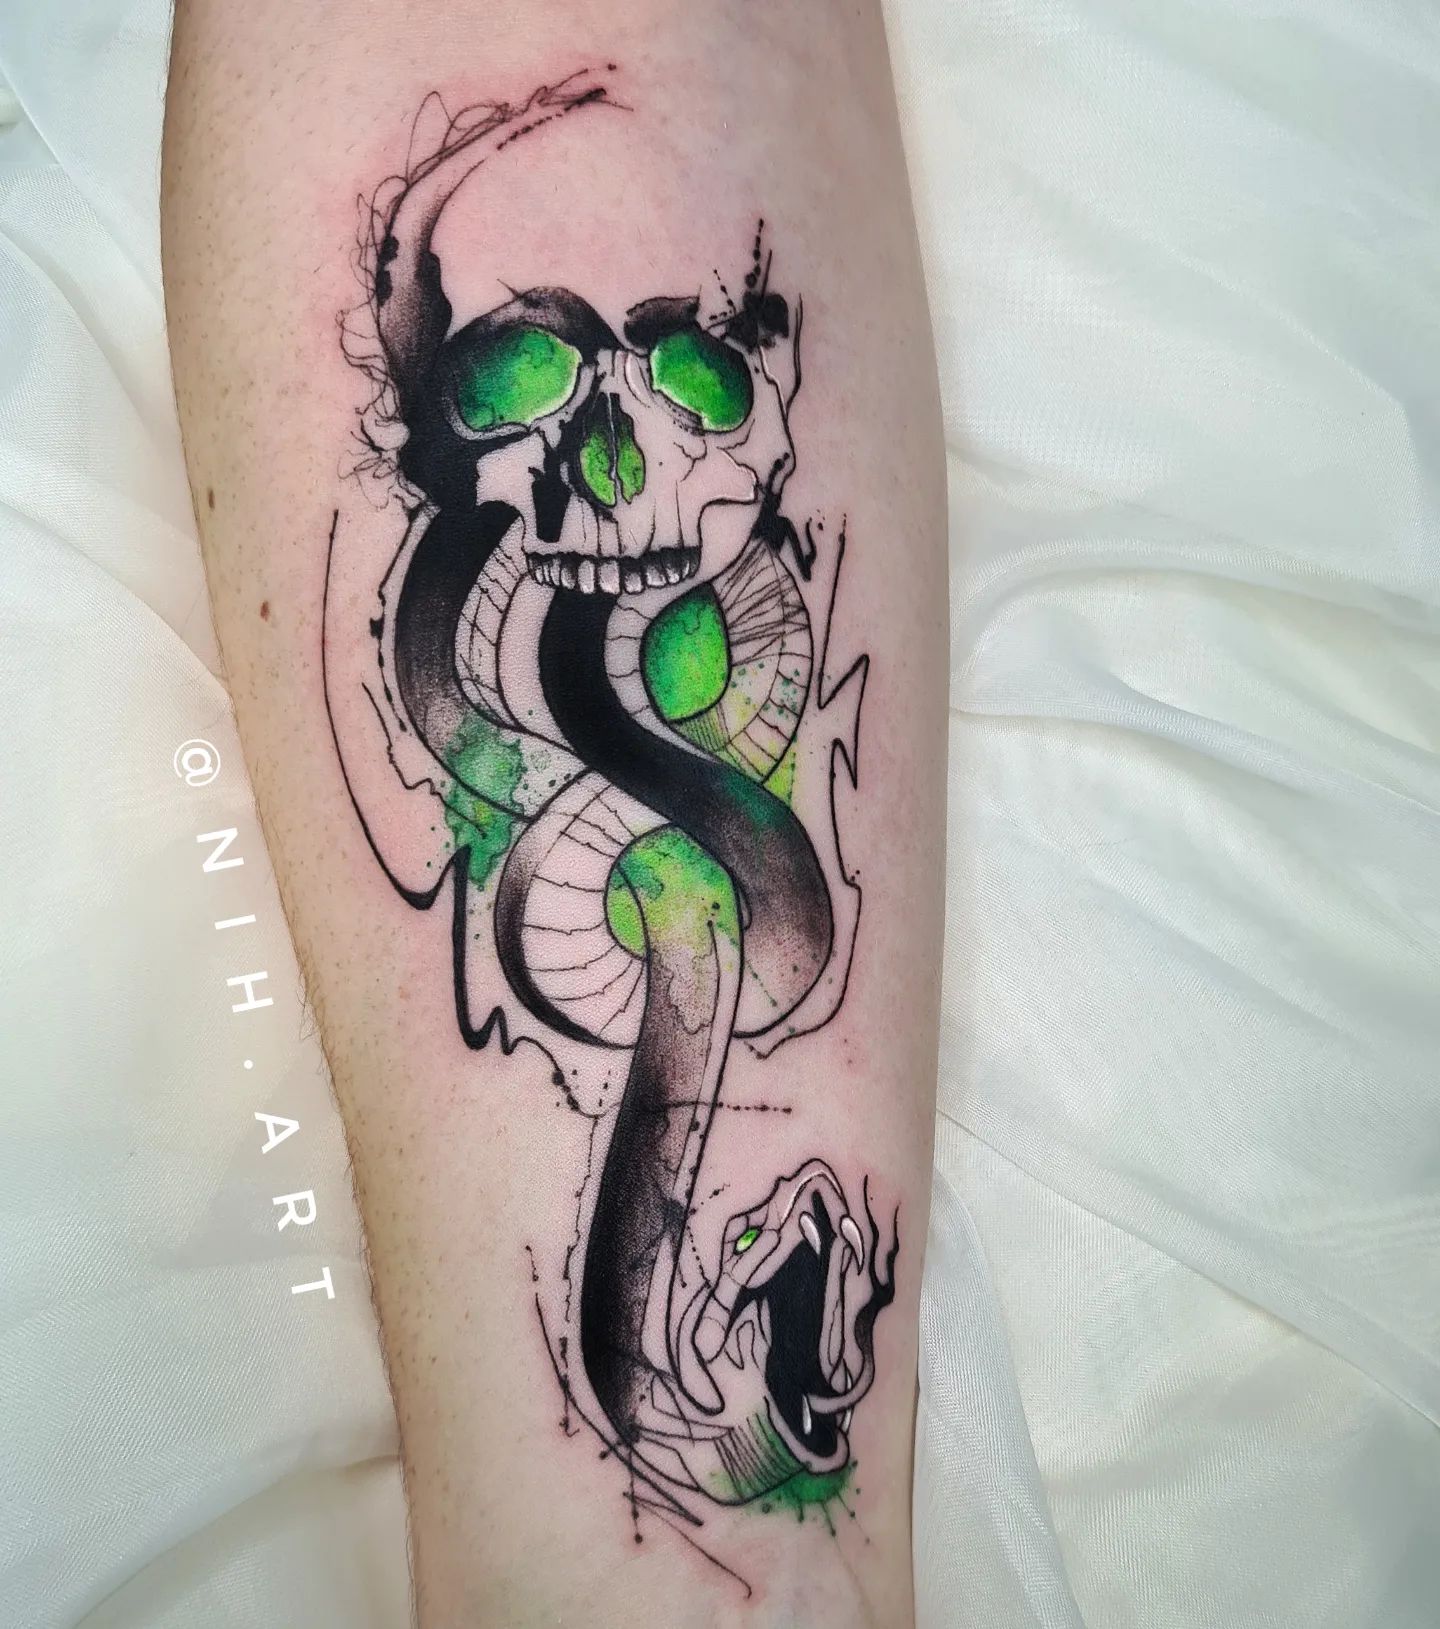 Don't you think that this tattoo looks like it was taken from a comics? The technique used in it is quite amazing with neon green light effect. Let's give it a shot.